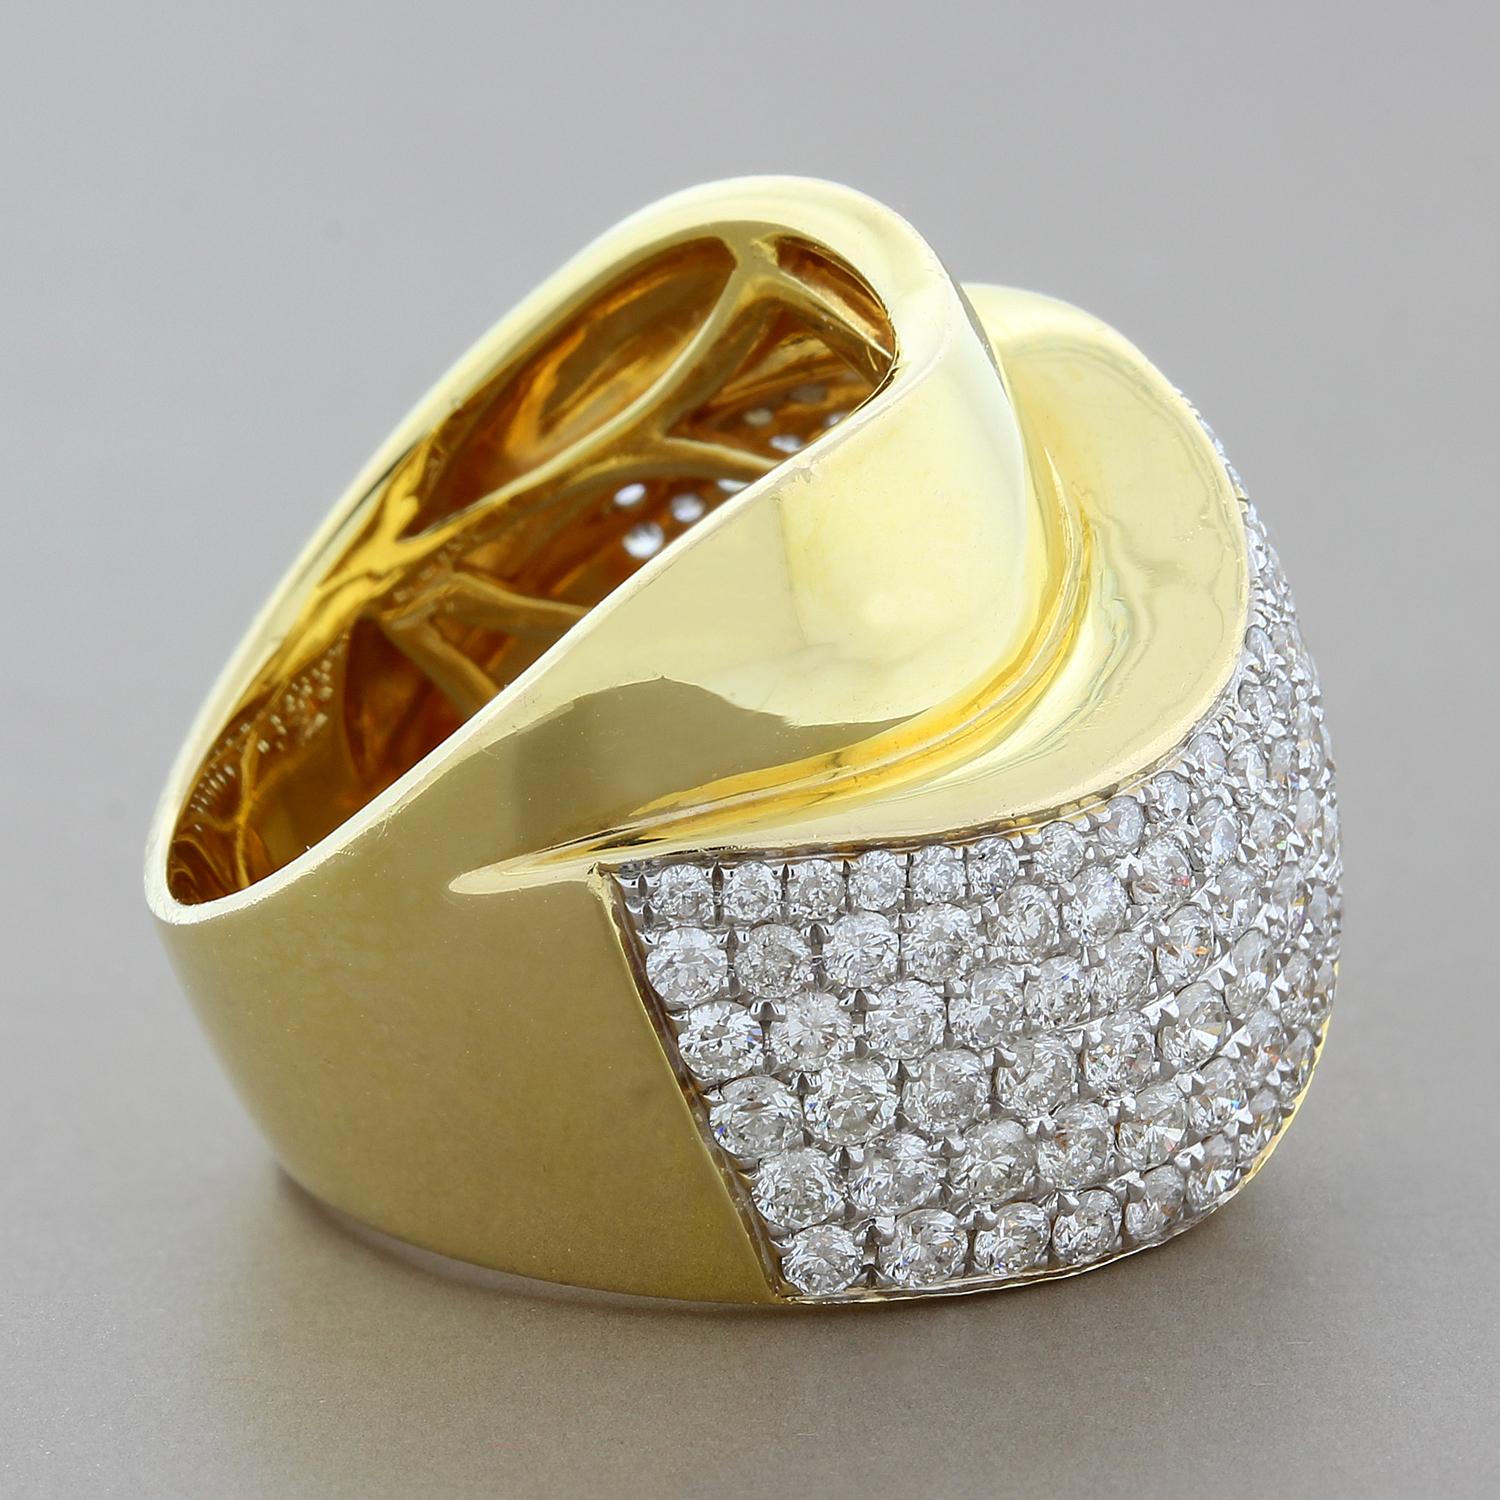 A unique band with a wave of high polish 14K yellow gold and white VS quality diamonds weighing 1.78 carats. The diamonds are set half circle around the ring.  It is super comfortable and a great addition to any outfit, day or night!

Currently ring